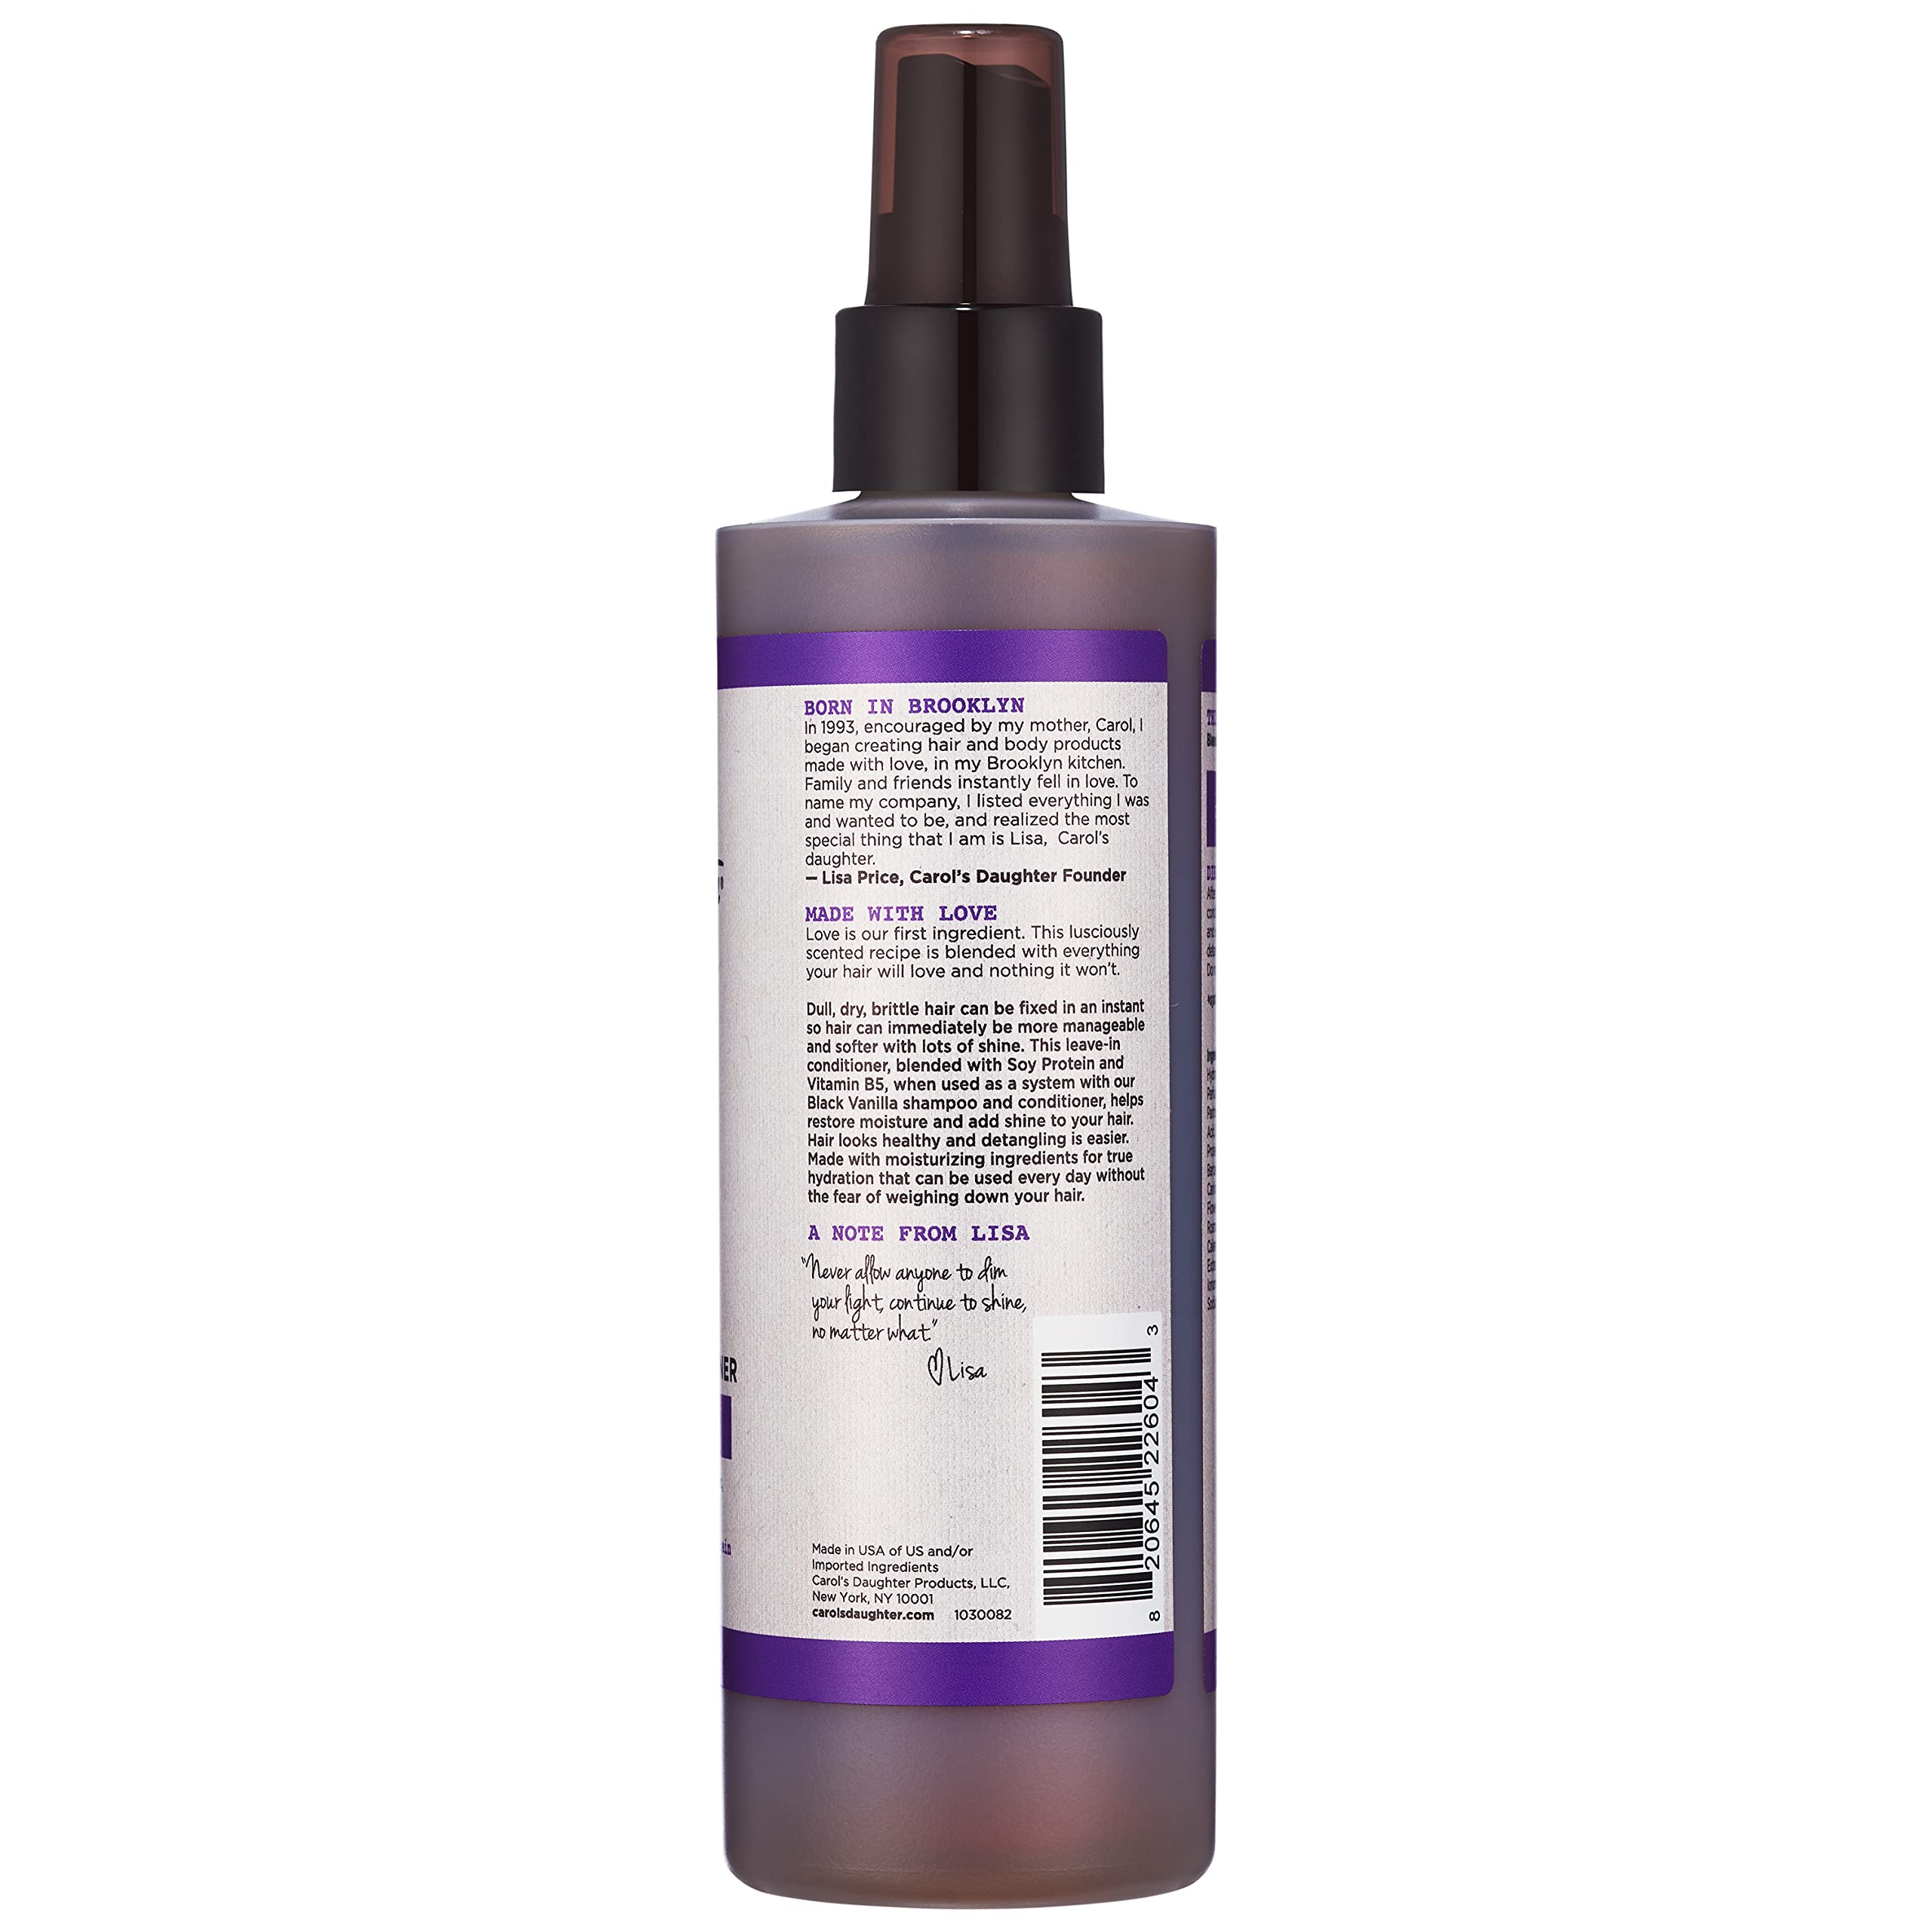 Carol's Daughter Black Vanilla Moisturizing Leave In Conditioner Spray - Made with Castor and Rosemary Oil, 8 fl oz